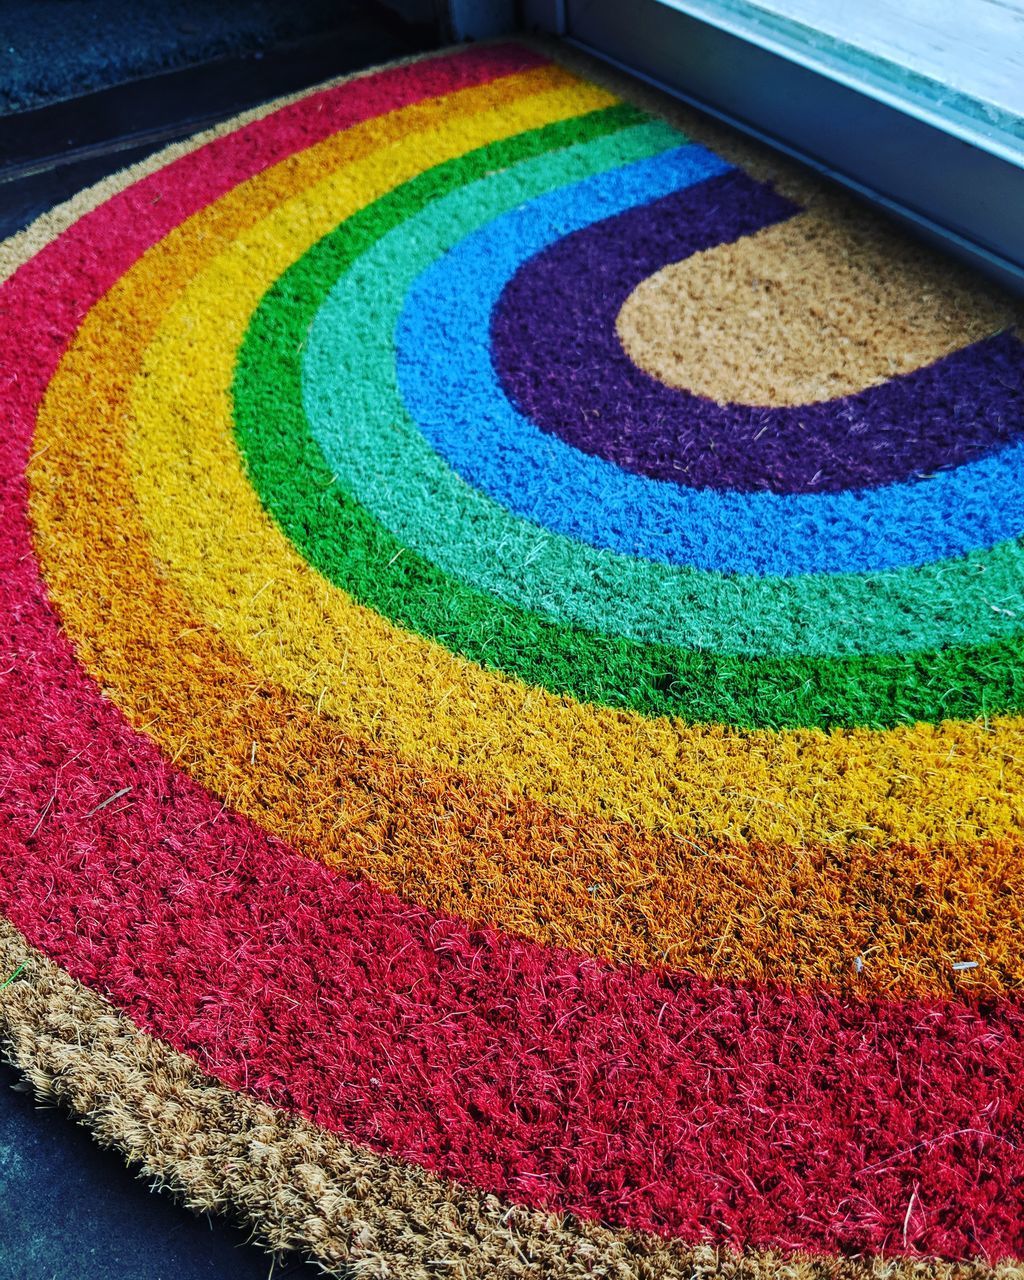 HIGH ANGLE VIEW OF MULTI COLORED RUG ON CARPET